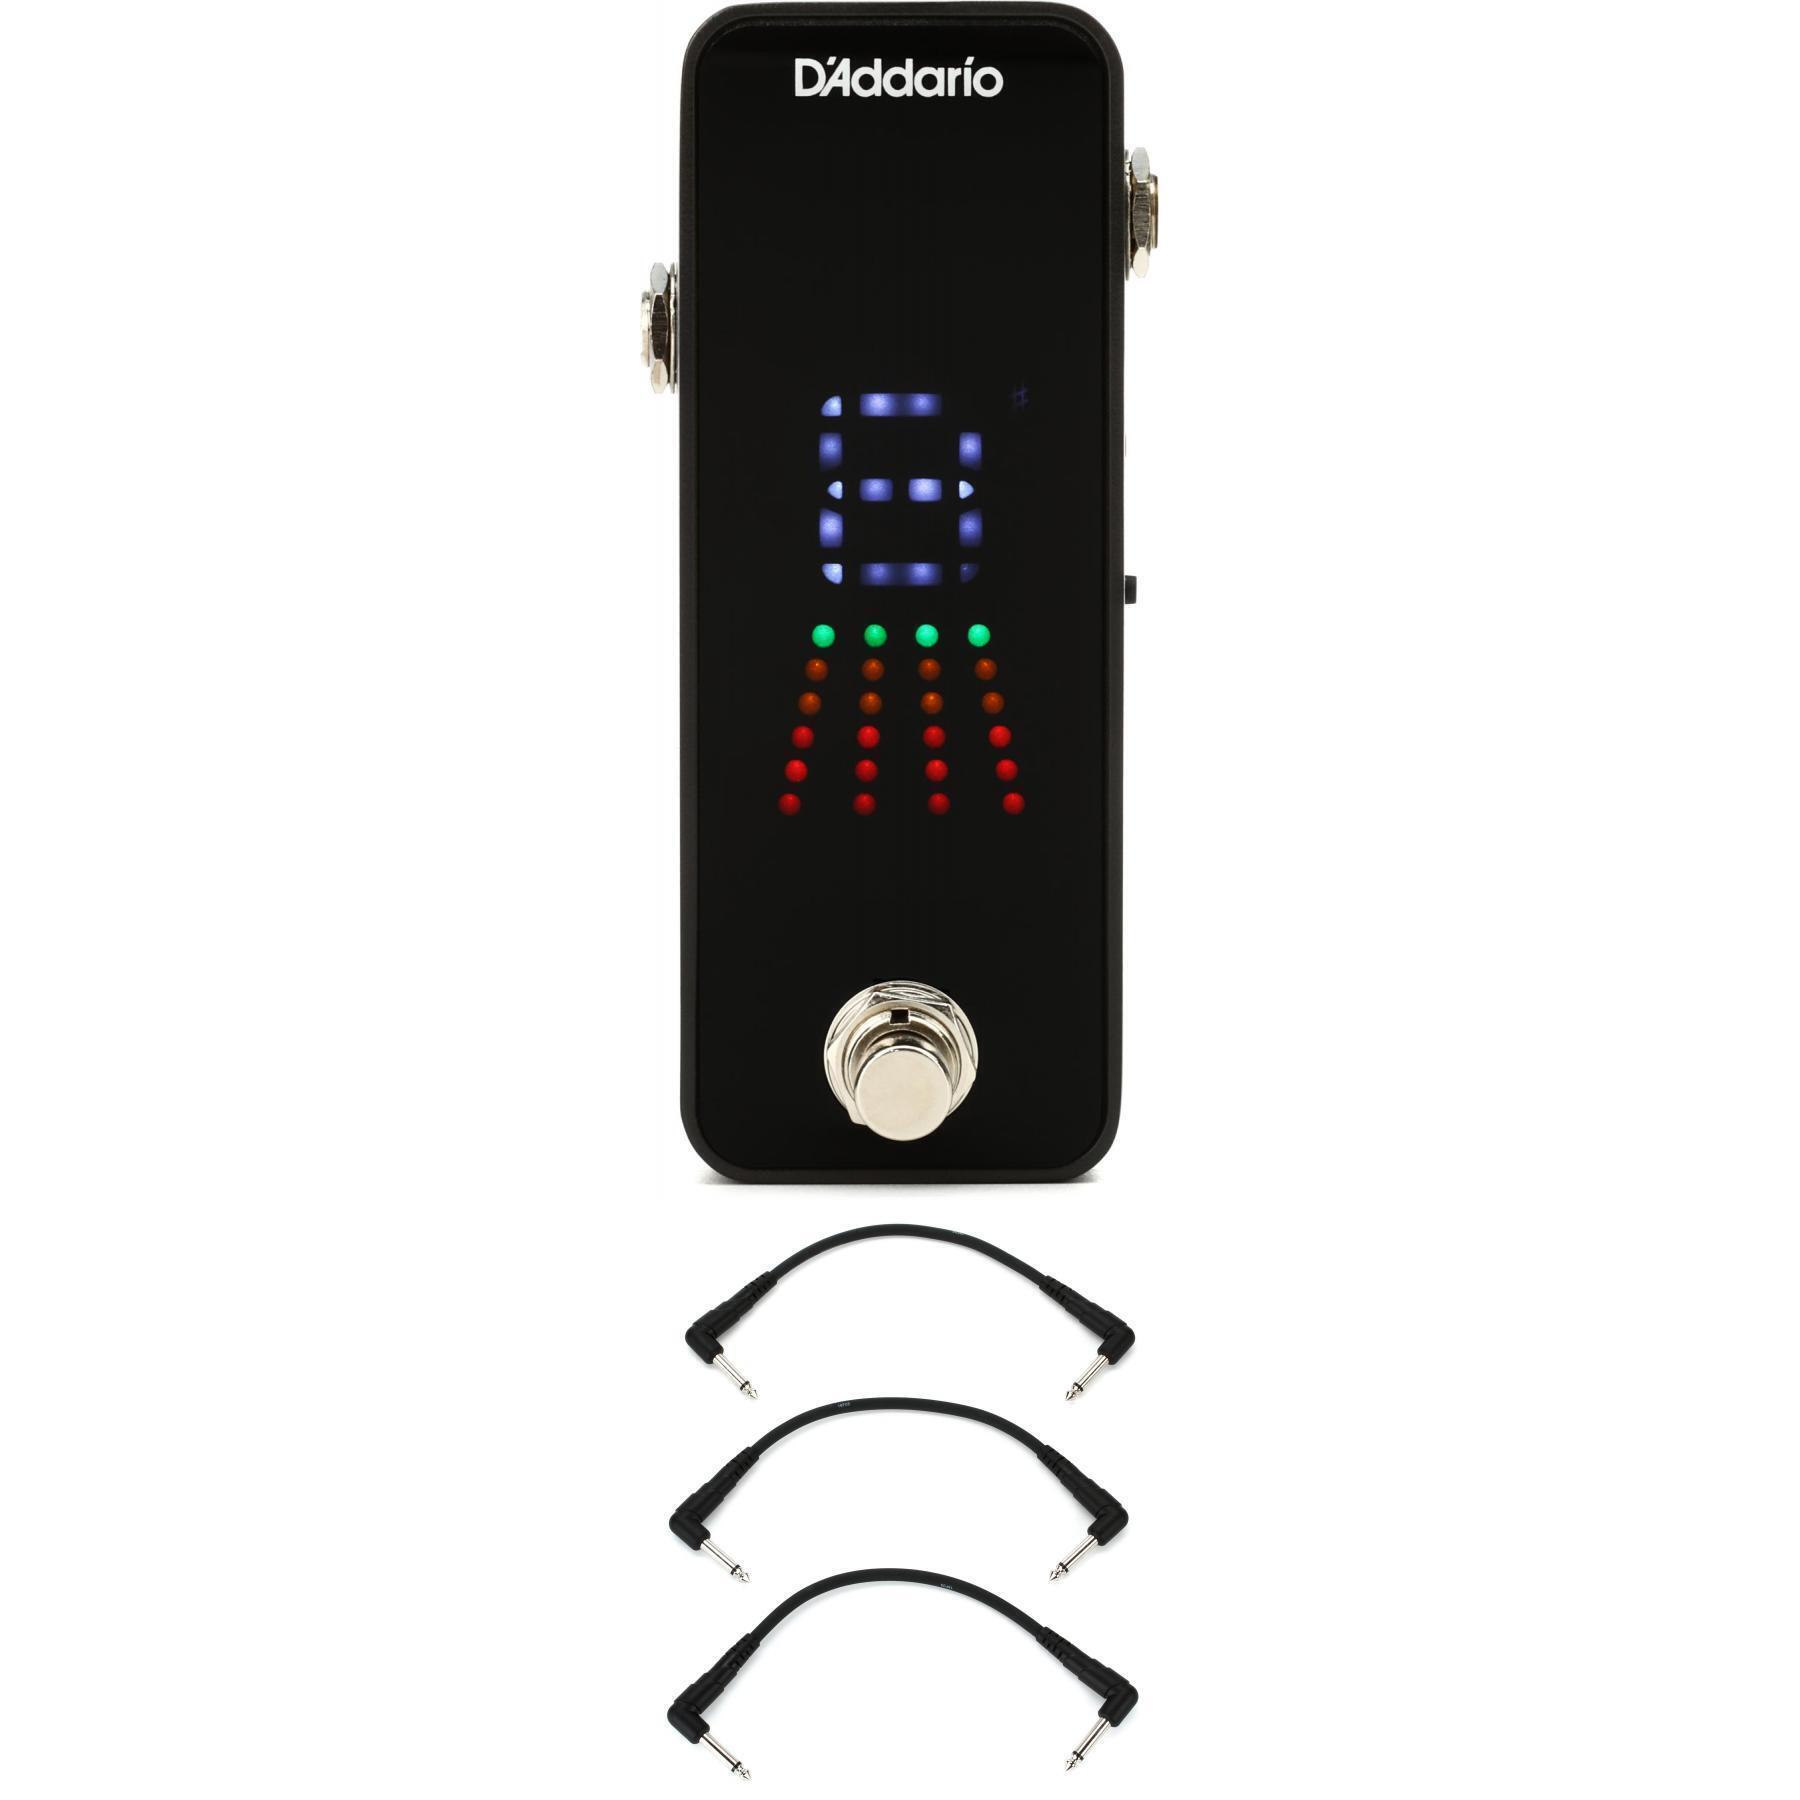 D'Addario Chromatic Pedal Tuner+ Tuner Pedal | Sweetwater